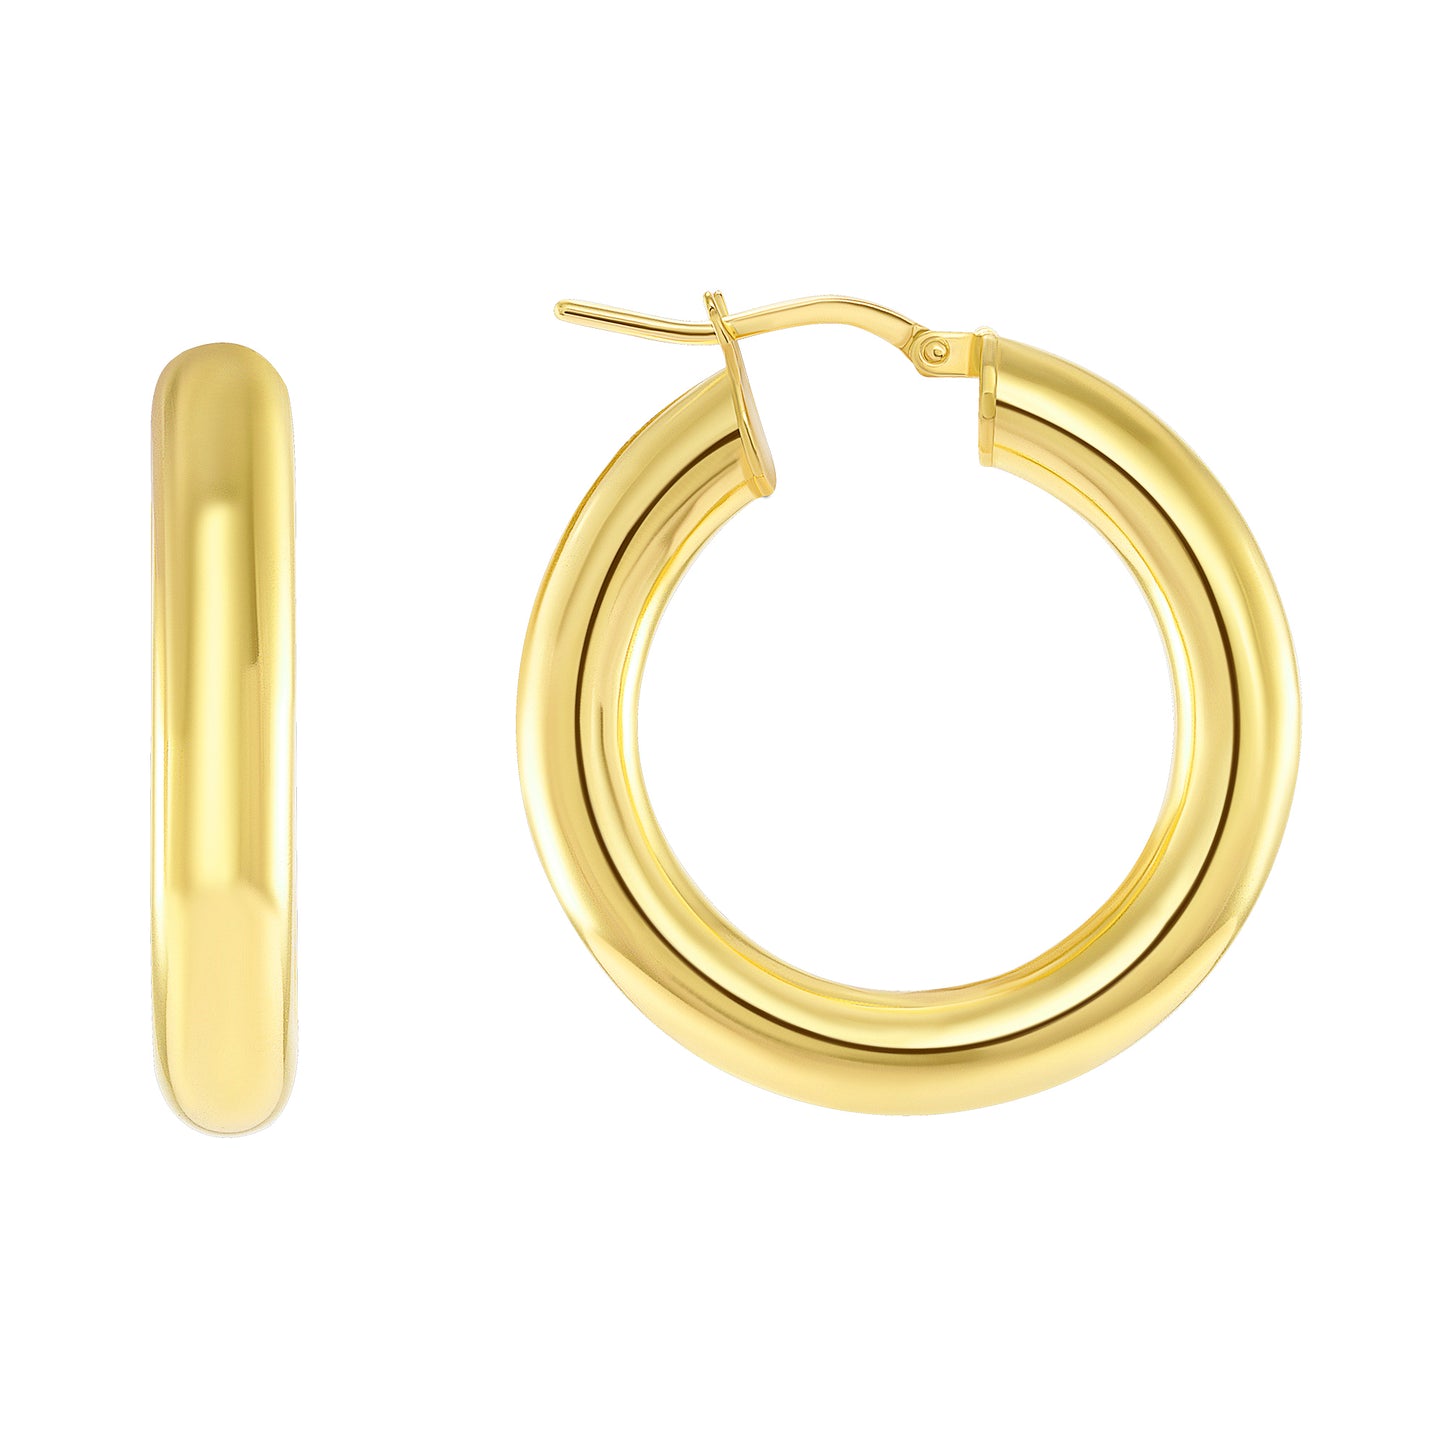 Silver 925 Gold Plated 20MM Round Plain Hoop Earrings. ITHP04-20MMG